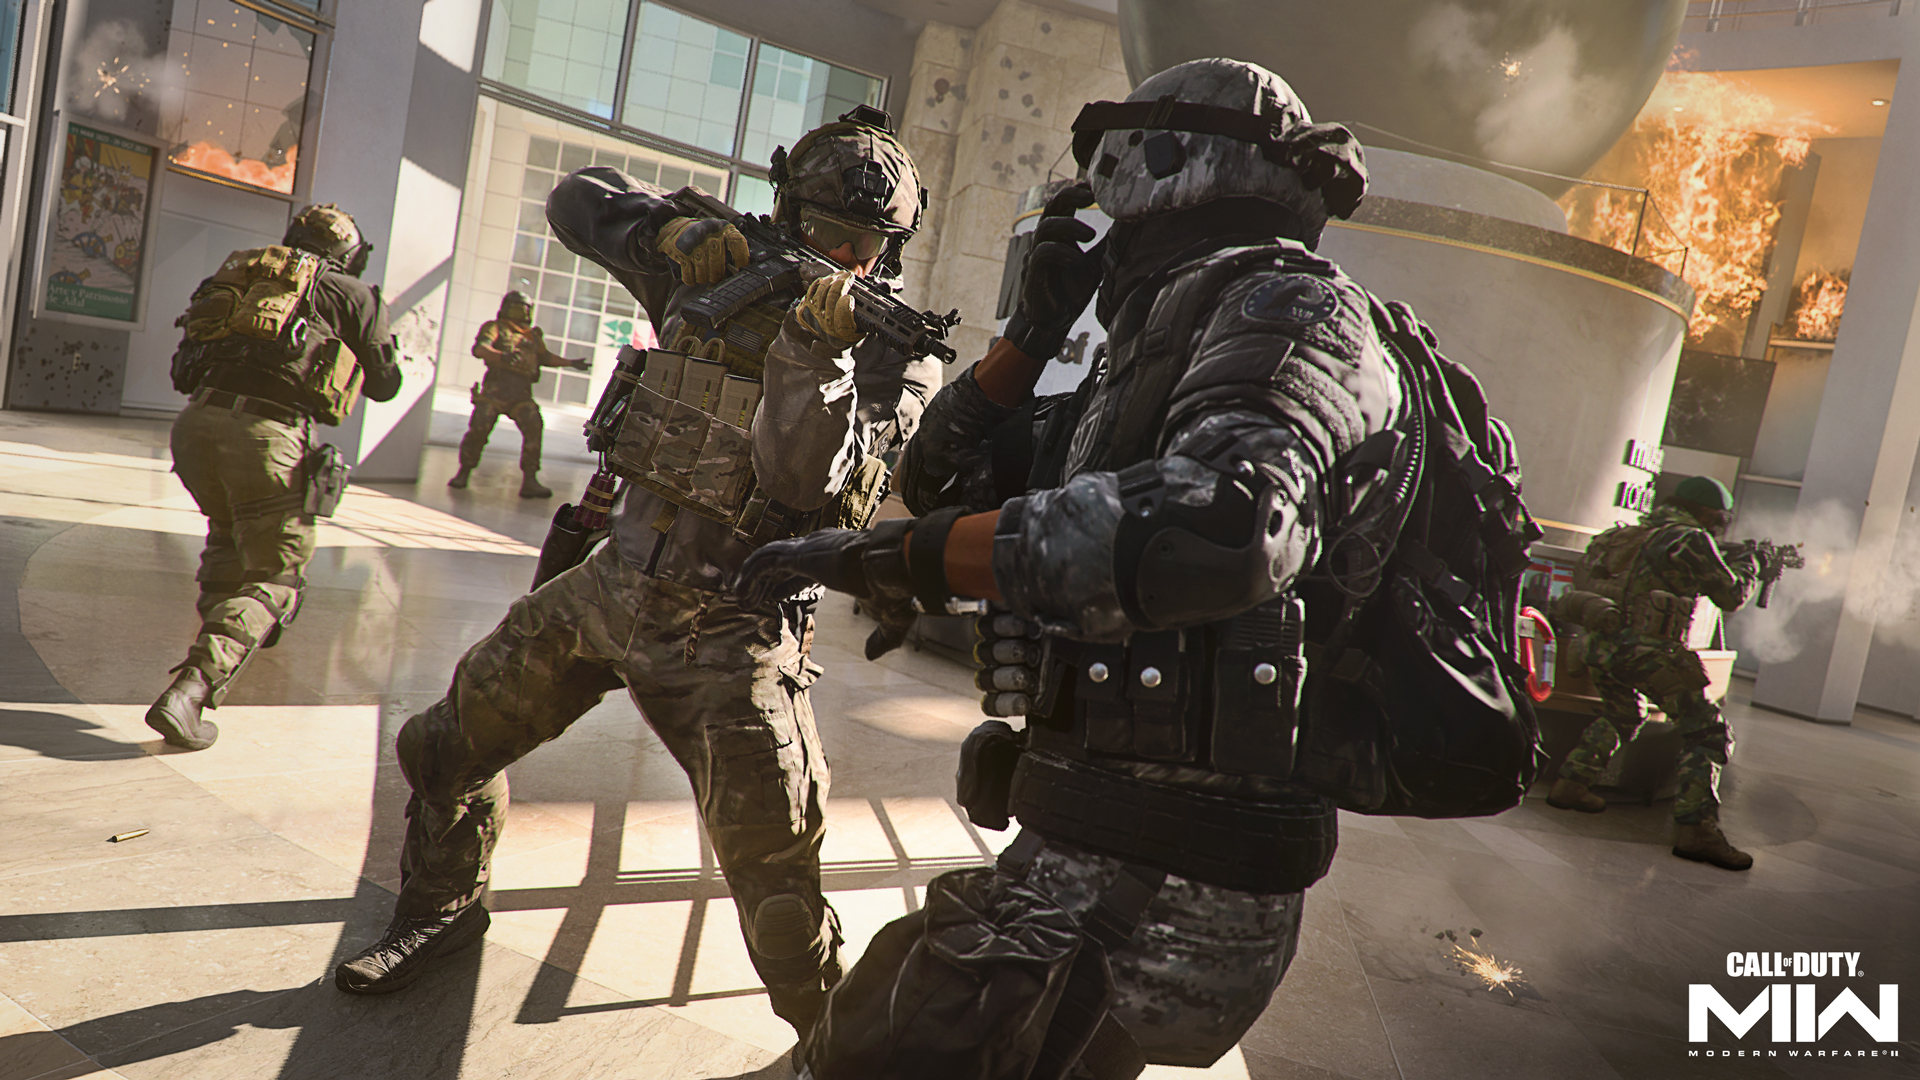 Everything You Need to Know About Call of Duty: Warzone 2.0 and Modern  Warfare II Season 02 Reloaded Overview — Call of Duty: Modern Warfare II —  Blizzard News